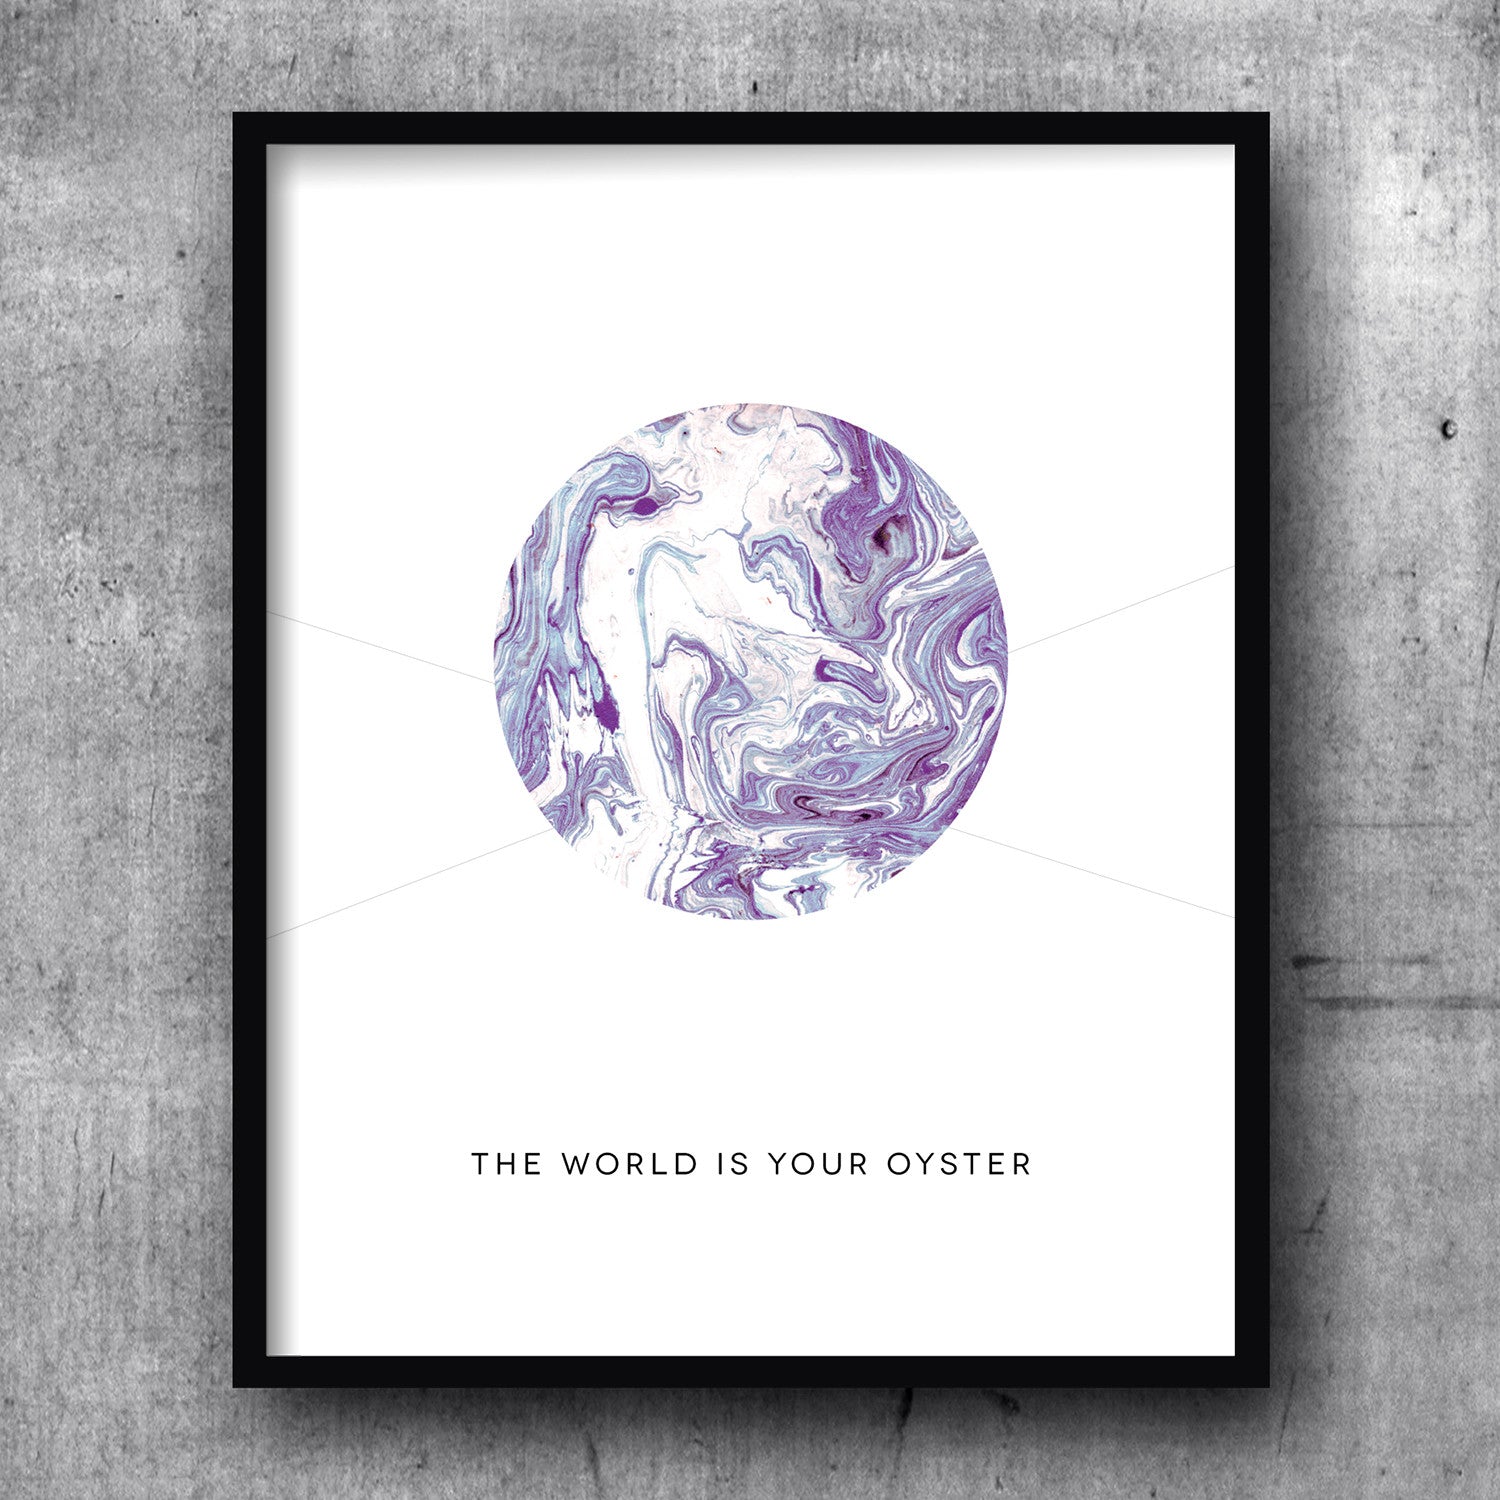 THE WORLD IS YOUR OYSTER Inspirational Marble ART PRINT BY PIXELIMPRESS